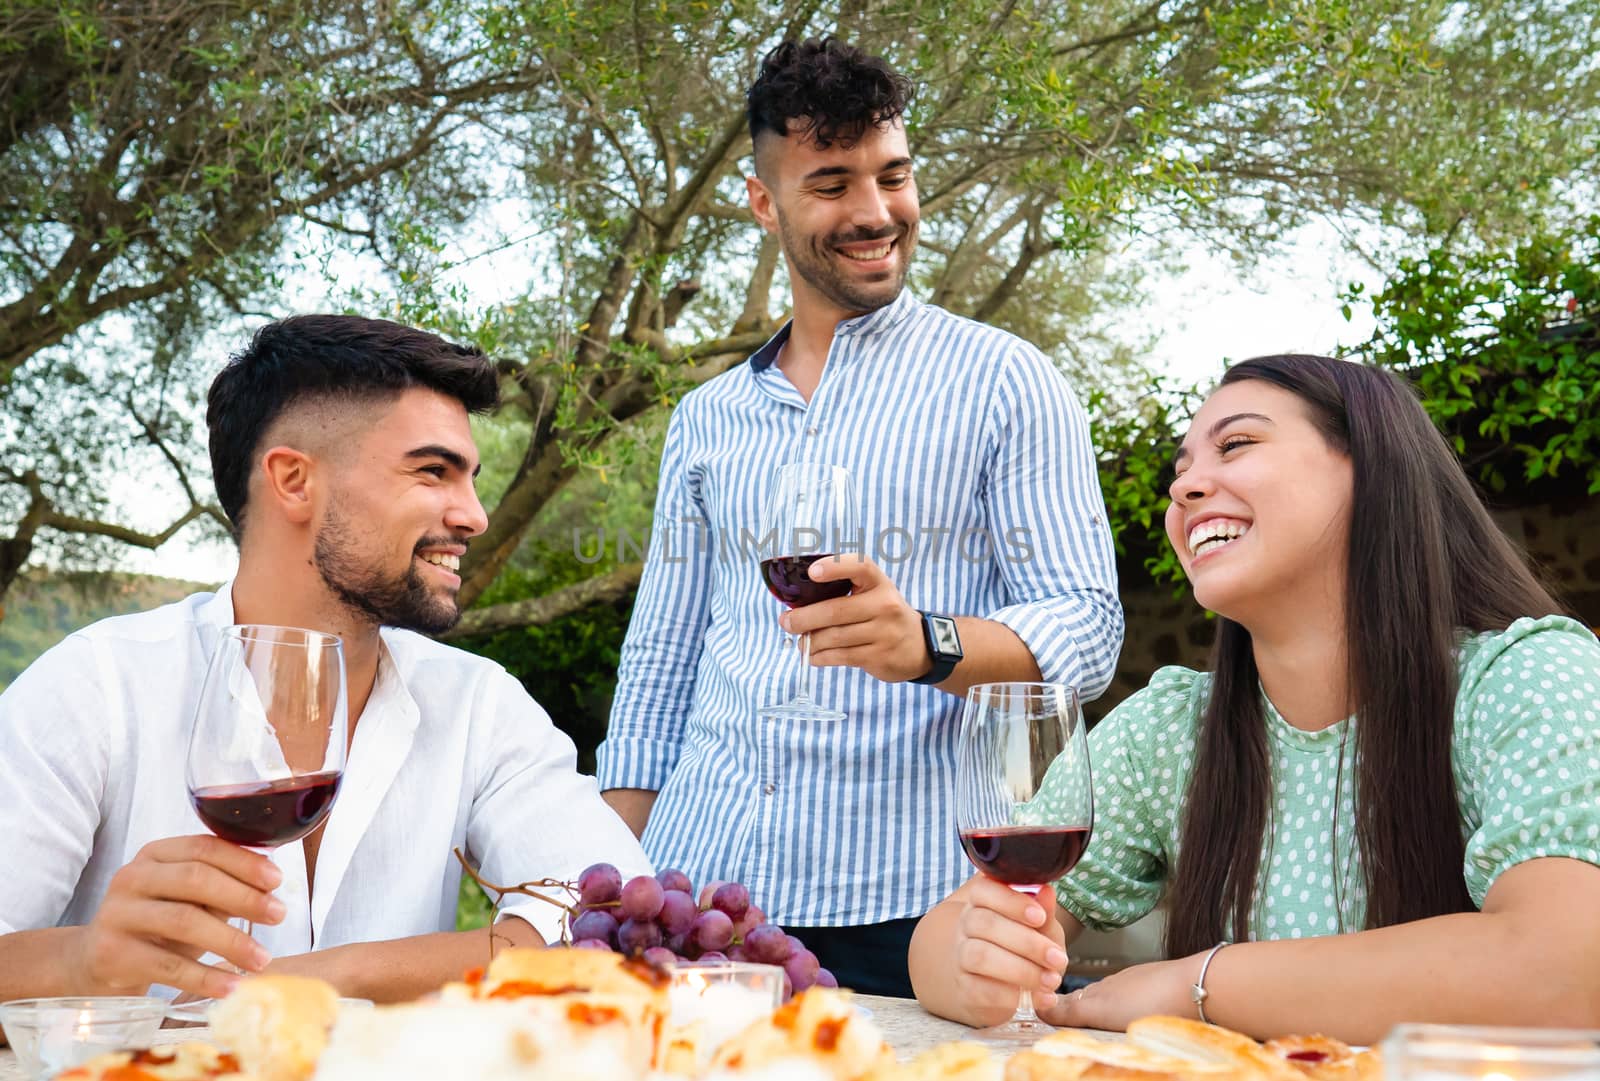 Three attractive young happy people celebrating outdoor holding red wine glasses - Stylish millennial friends having fun in the garden drinking alcohol at a table laden with snacks and grapes